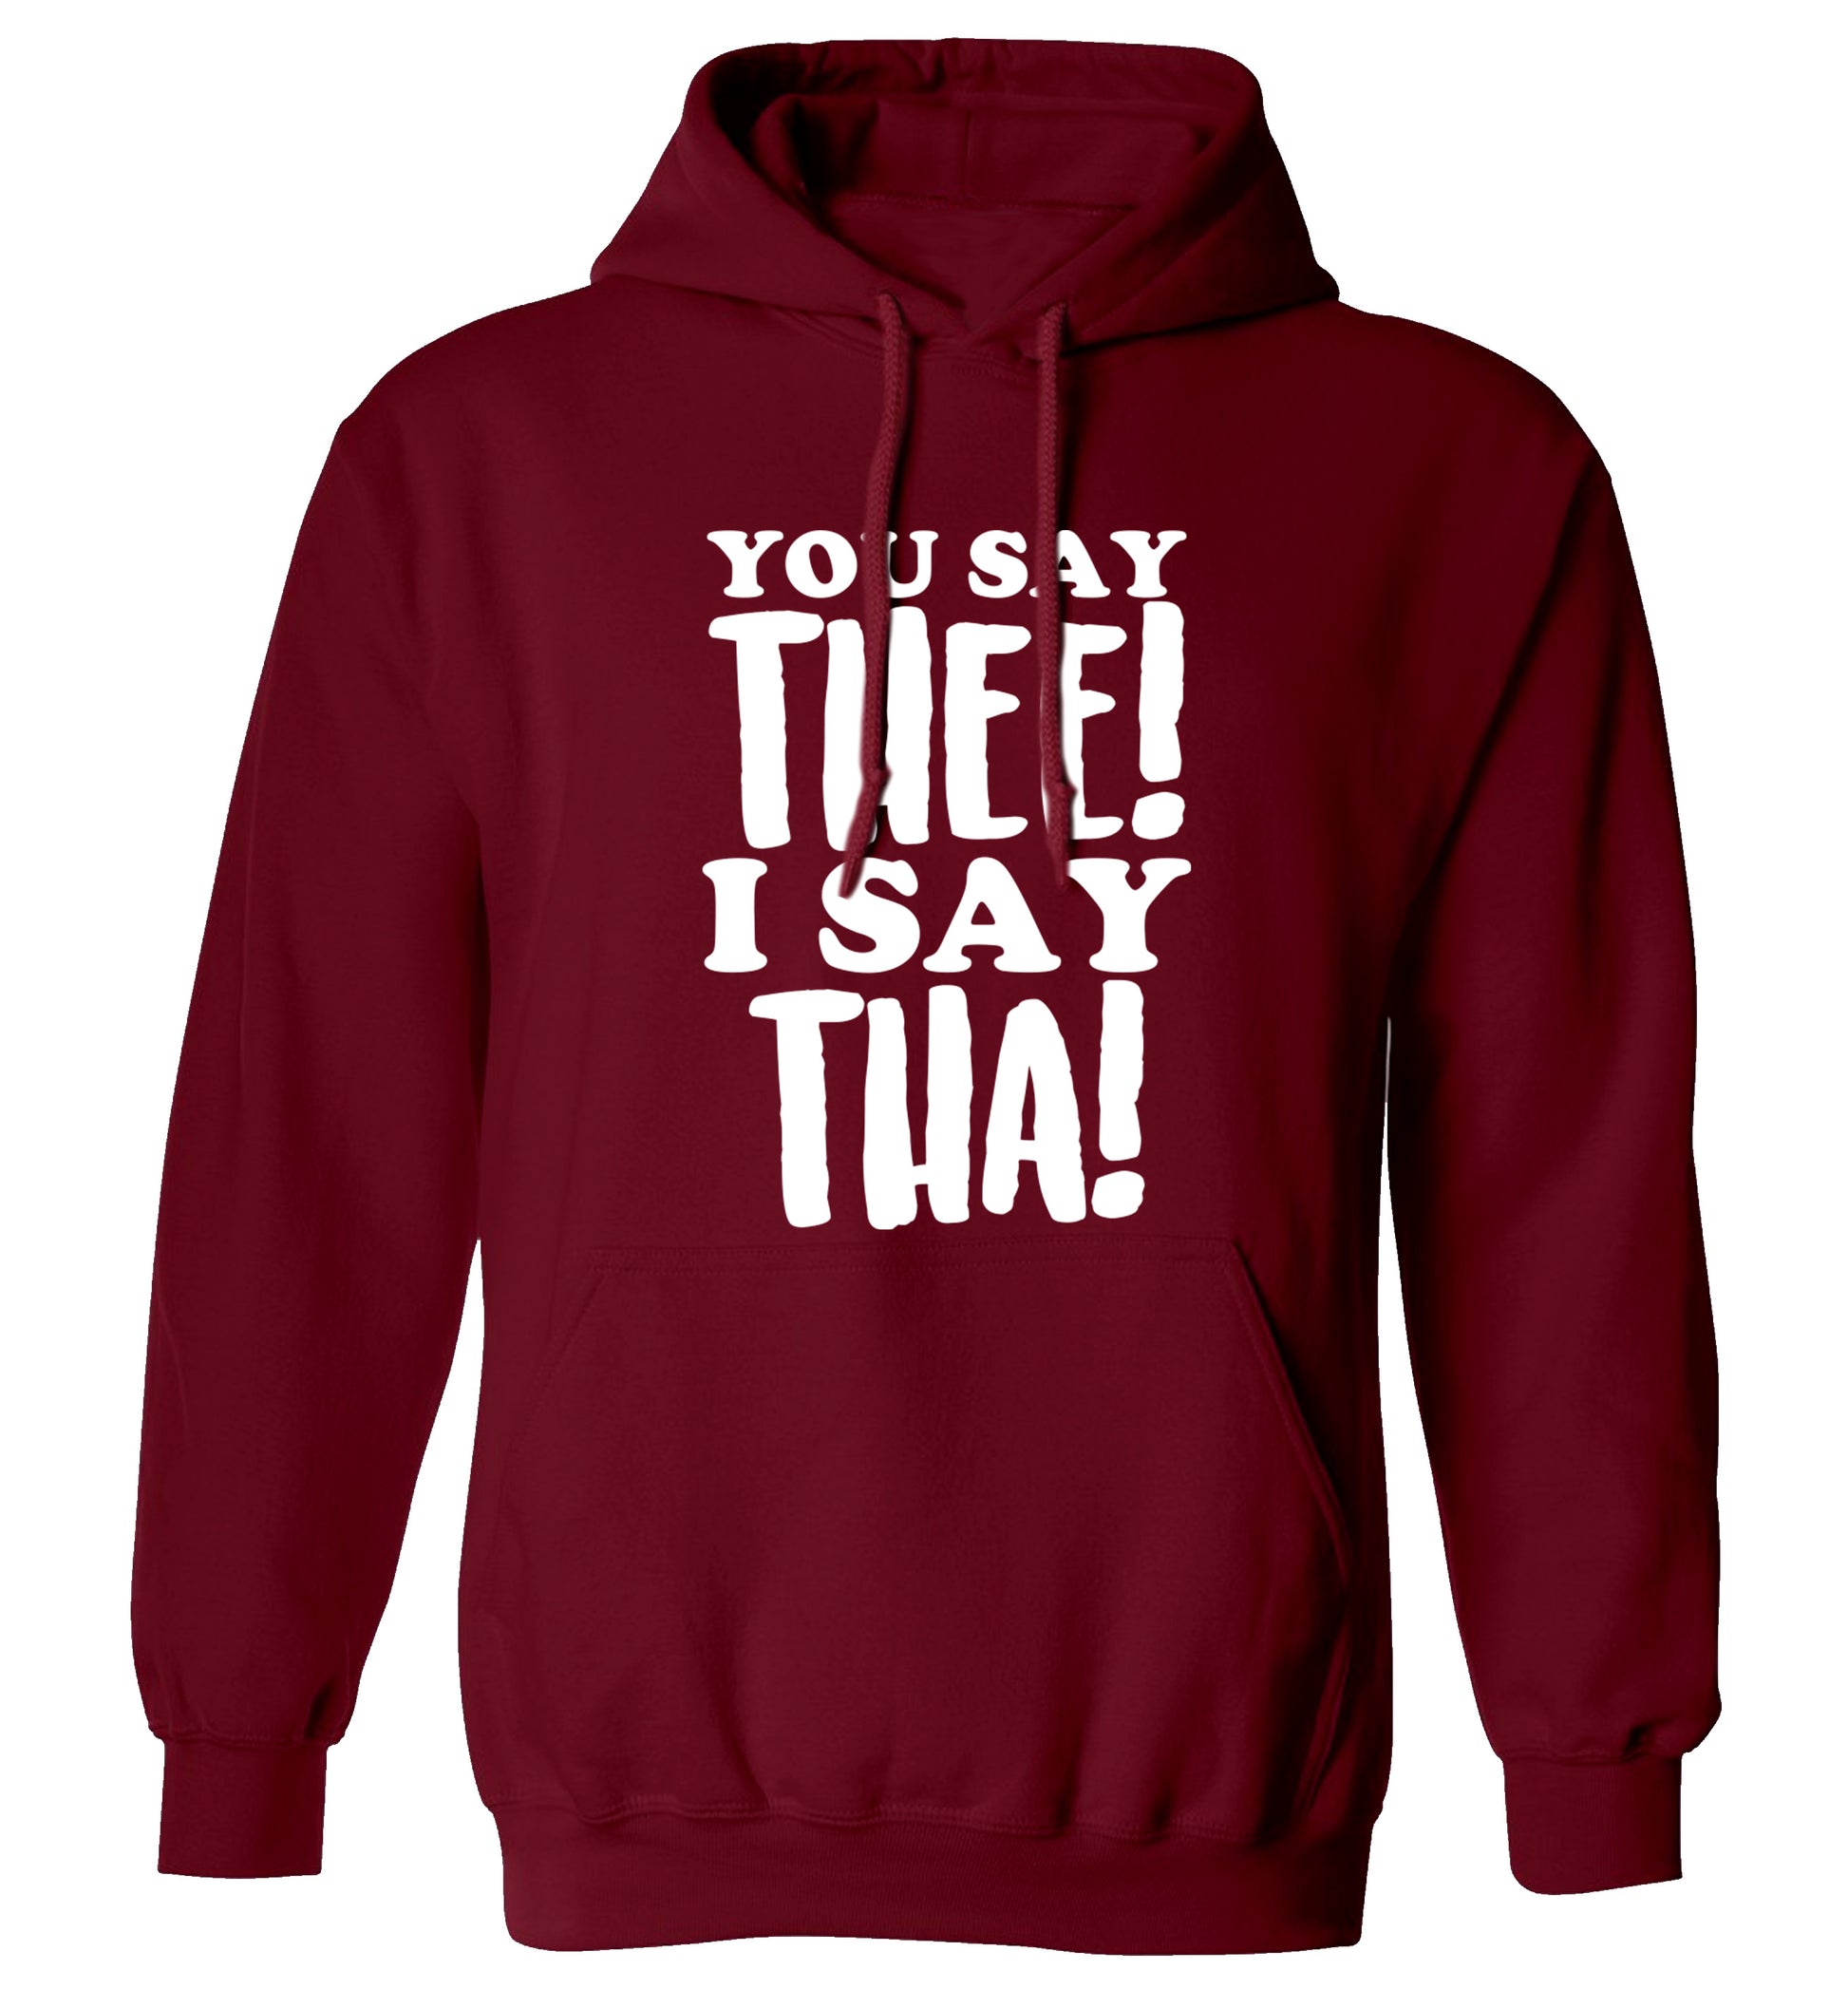 You say thee I say tha adults unisex maroon hoodie 2XL